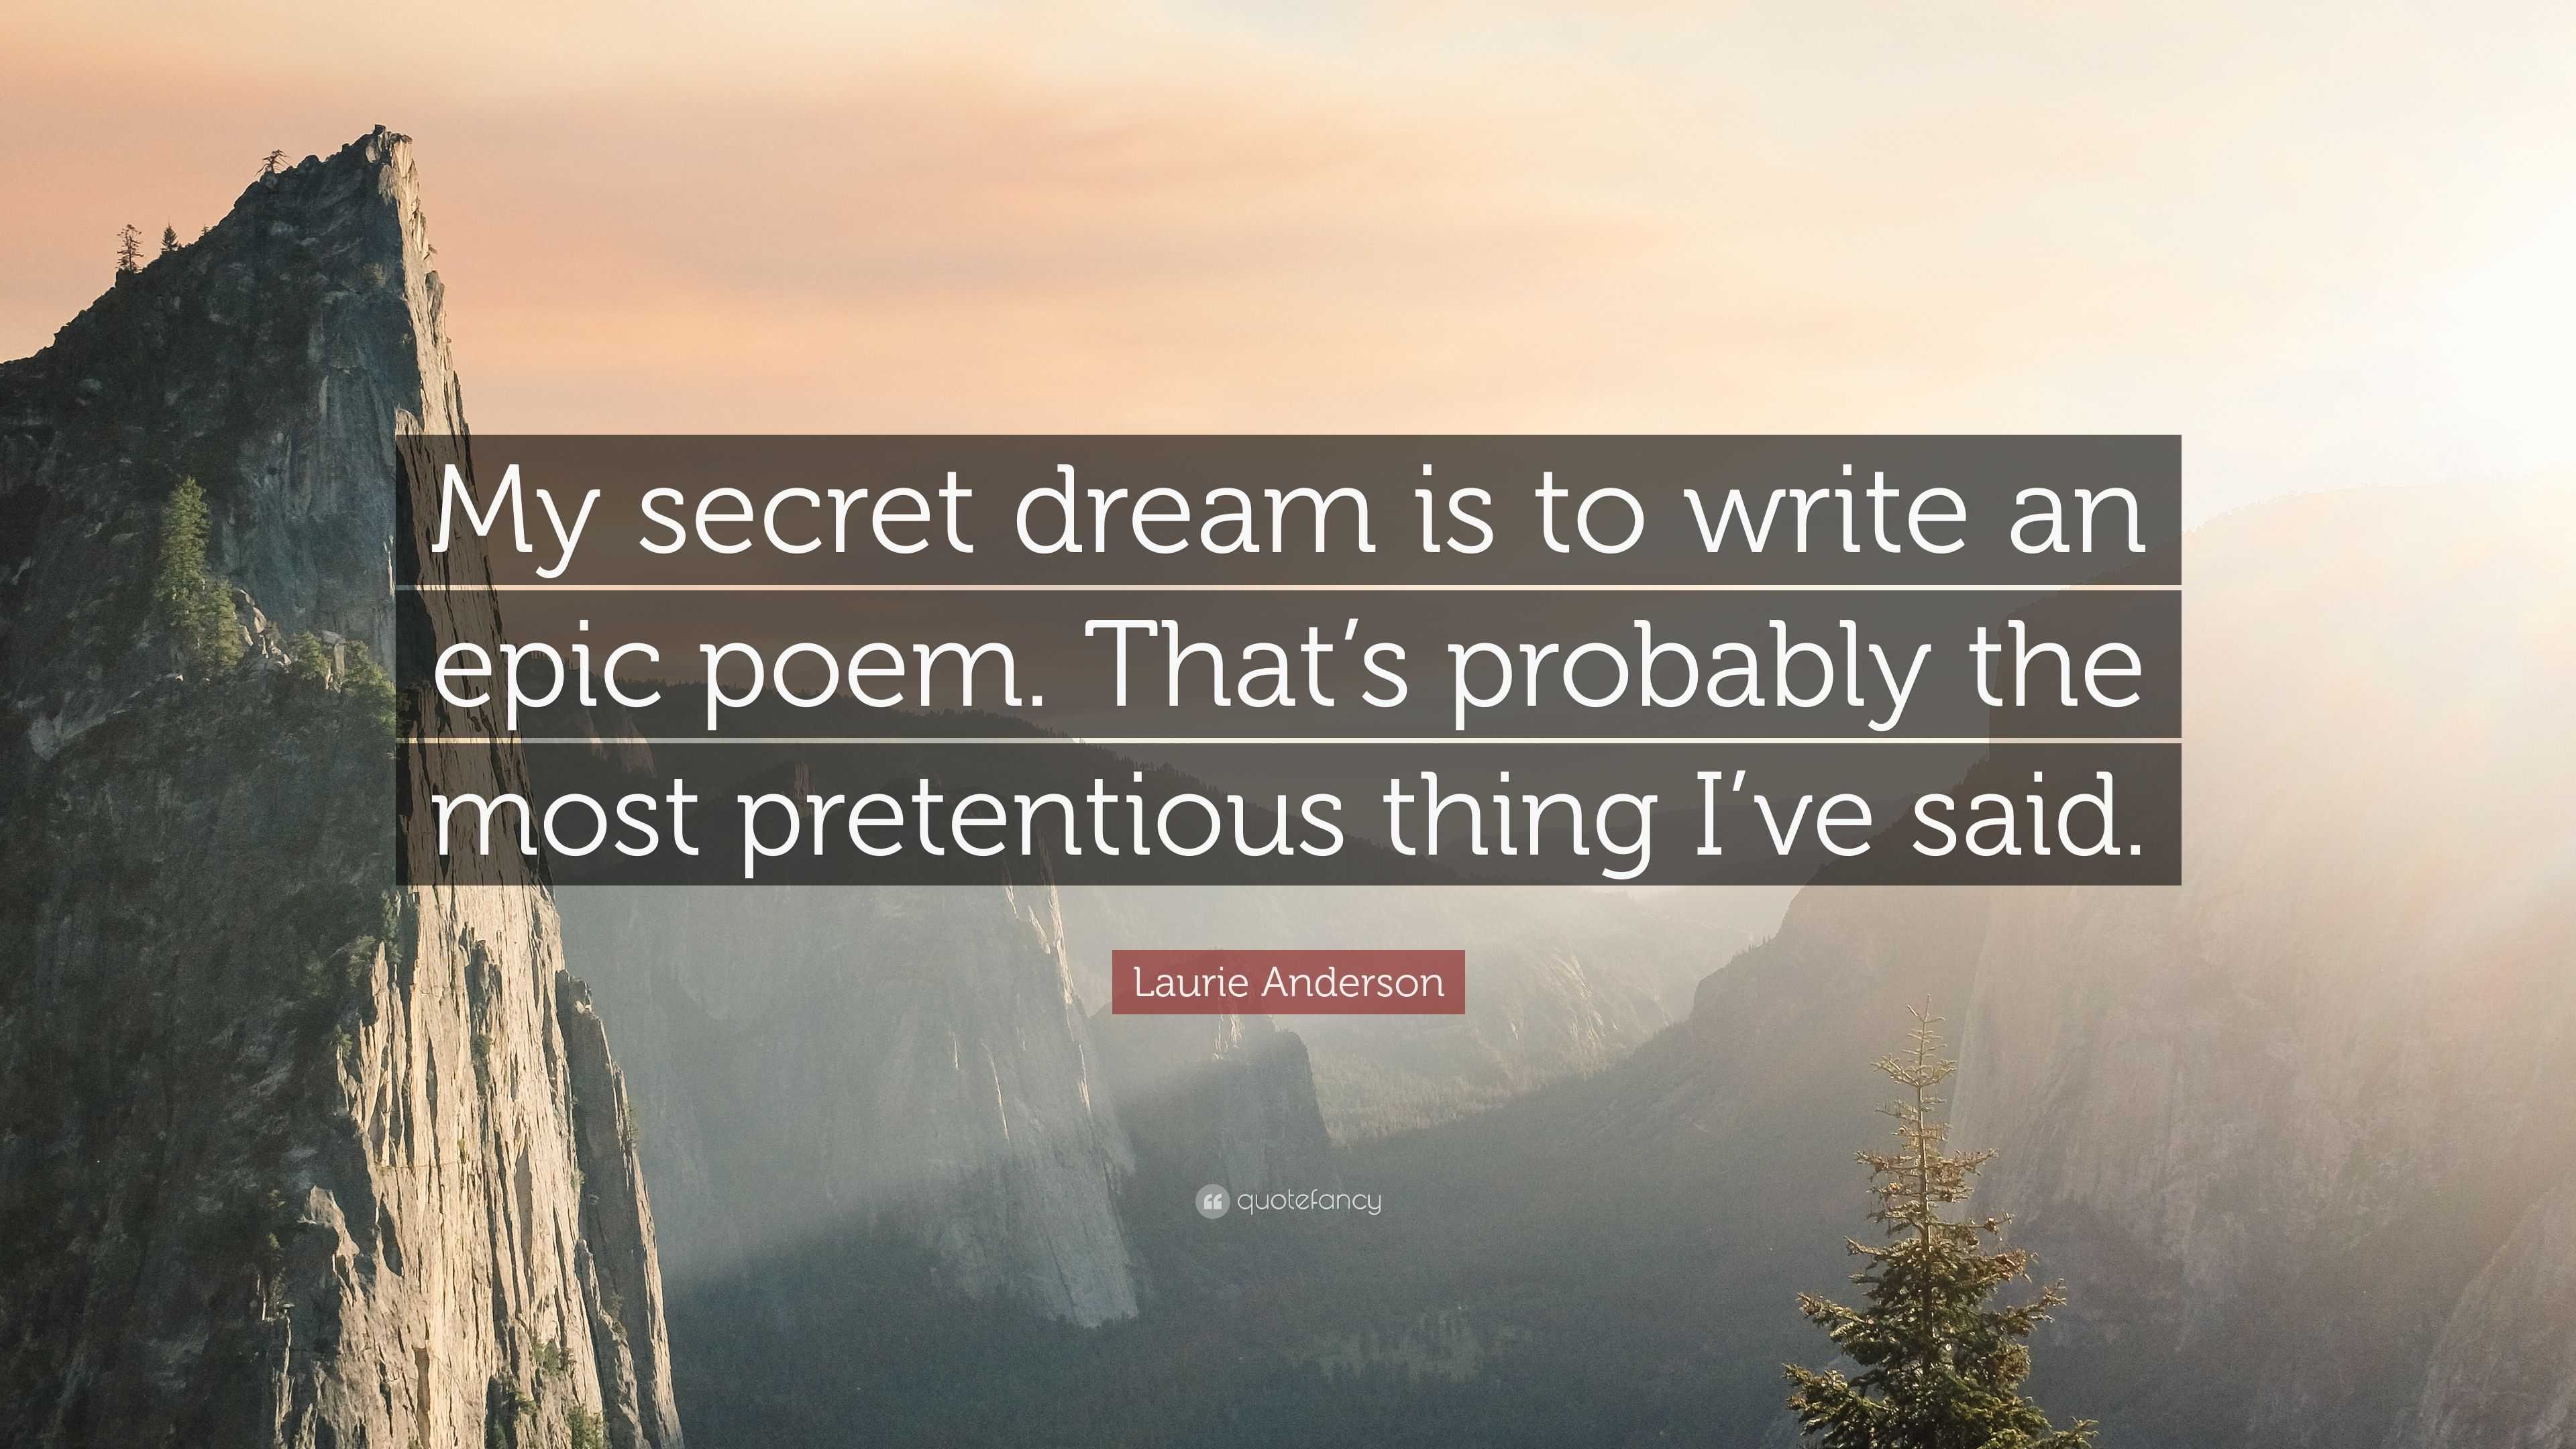 Laurie Anderson Quote: “My secret dream is to write an epic poem